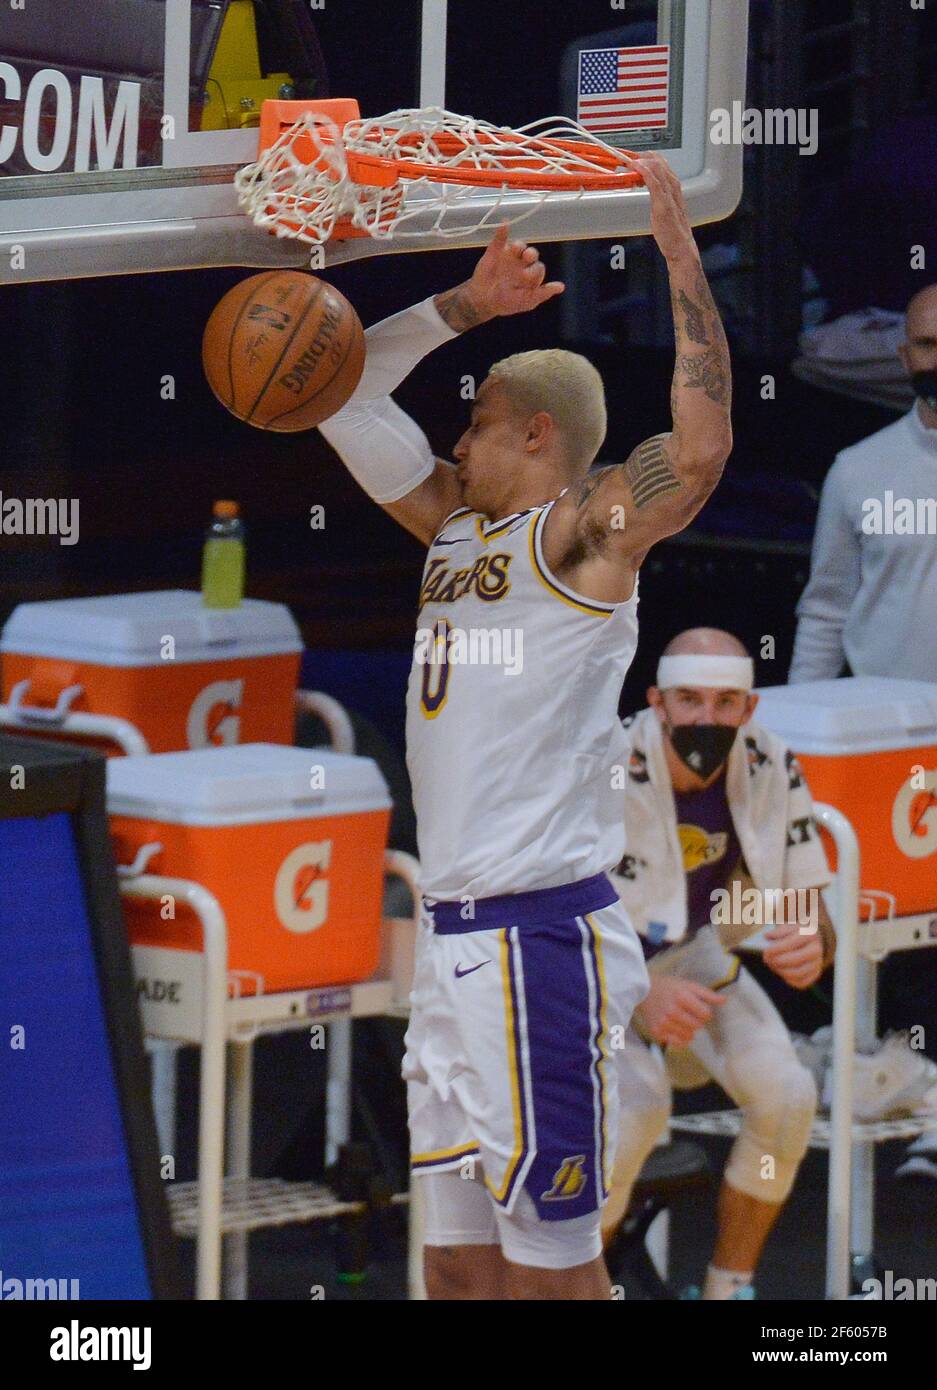 Los Angeles, United States. 29th Mar, 2021. Los Angeles Lakers' forward Kyle Kuzma jams for two points against the Orlando Magic during the second half at Staples Center in Los Angeles on Sunday, March 28, 2021. The Lakers defeated the Magic 96-93. Photo by Jim Ruymen/UPI Credit: UPI/Alamy Live News Stock Photo